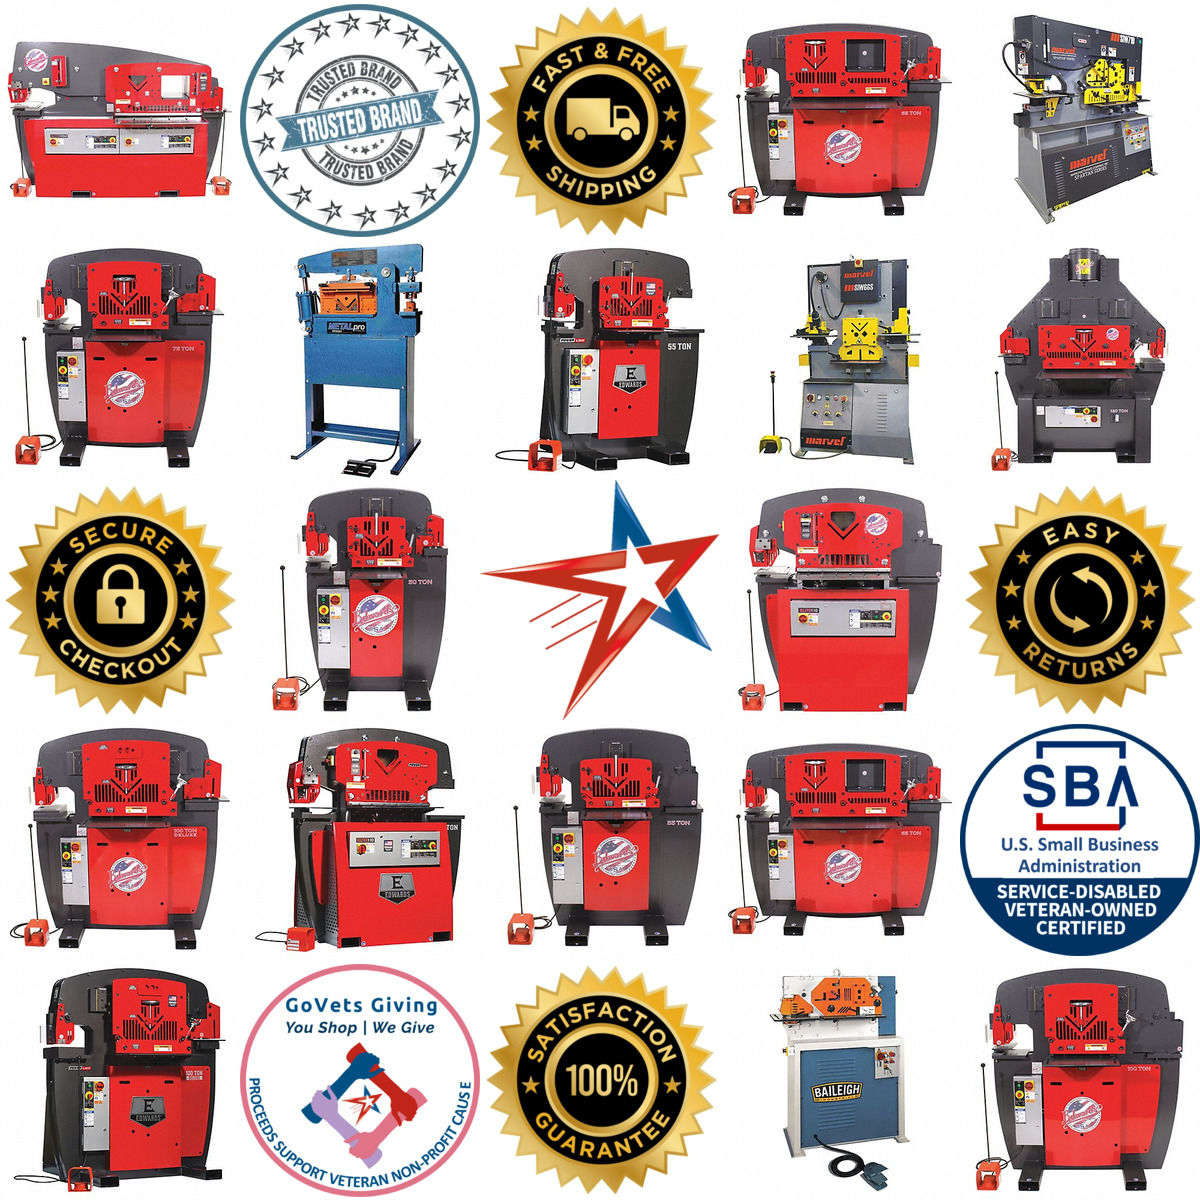 A selection of Corded Ironworkers products on GoVets